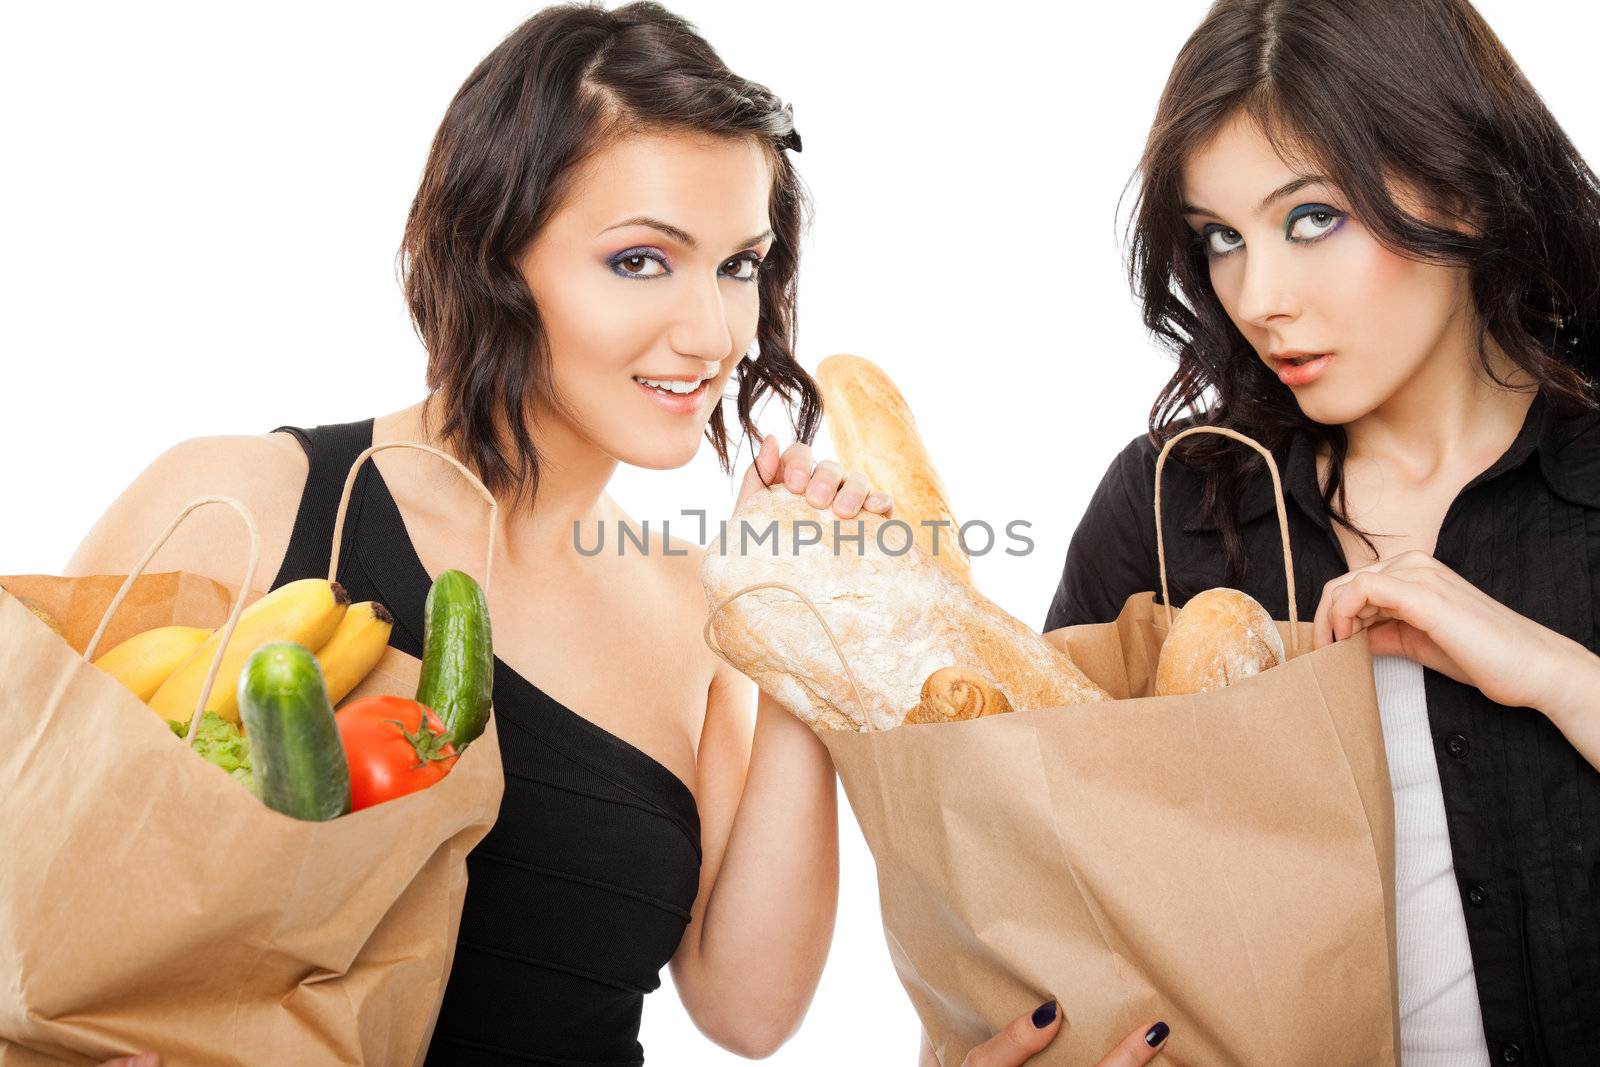 Two beautiful girlfriends holding shopping bags full of groceries, looking at camera